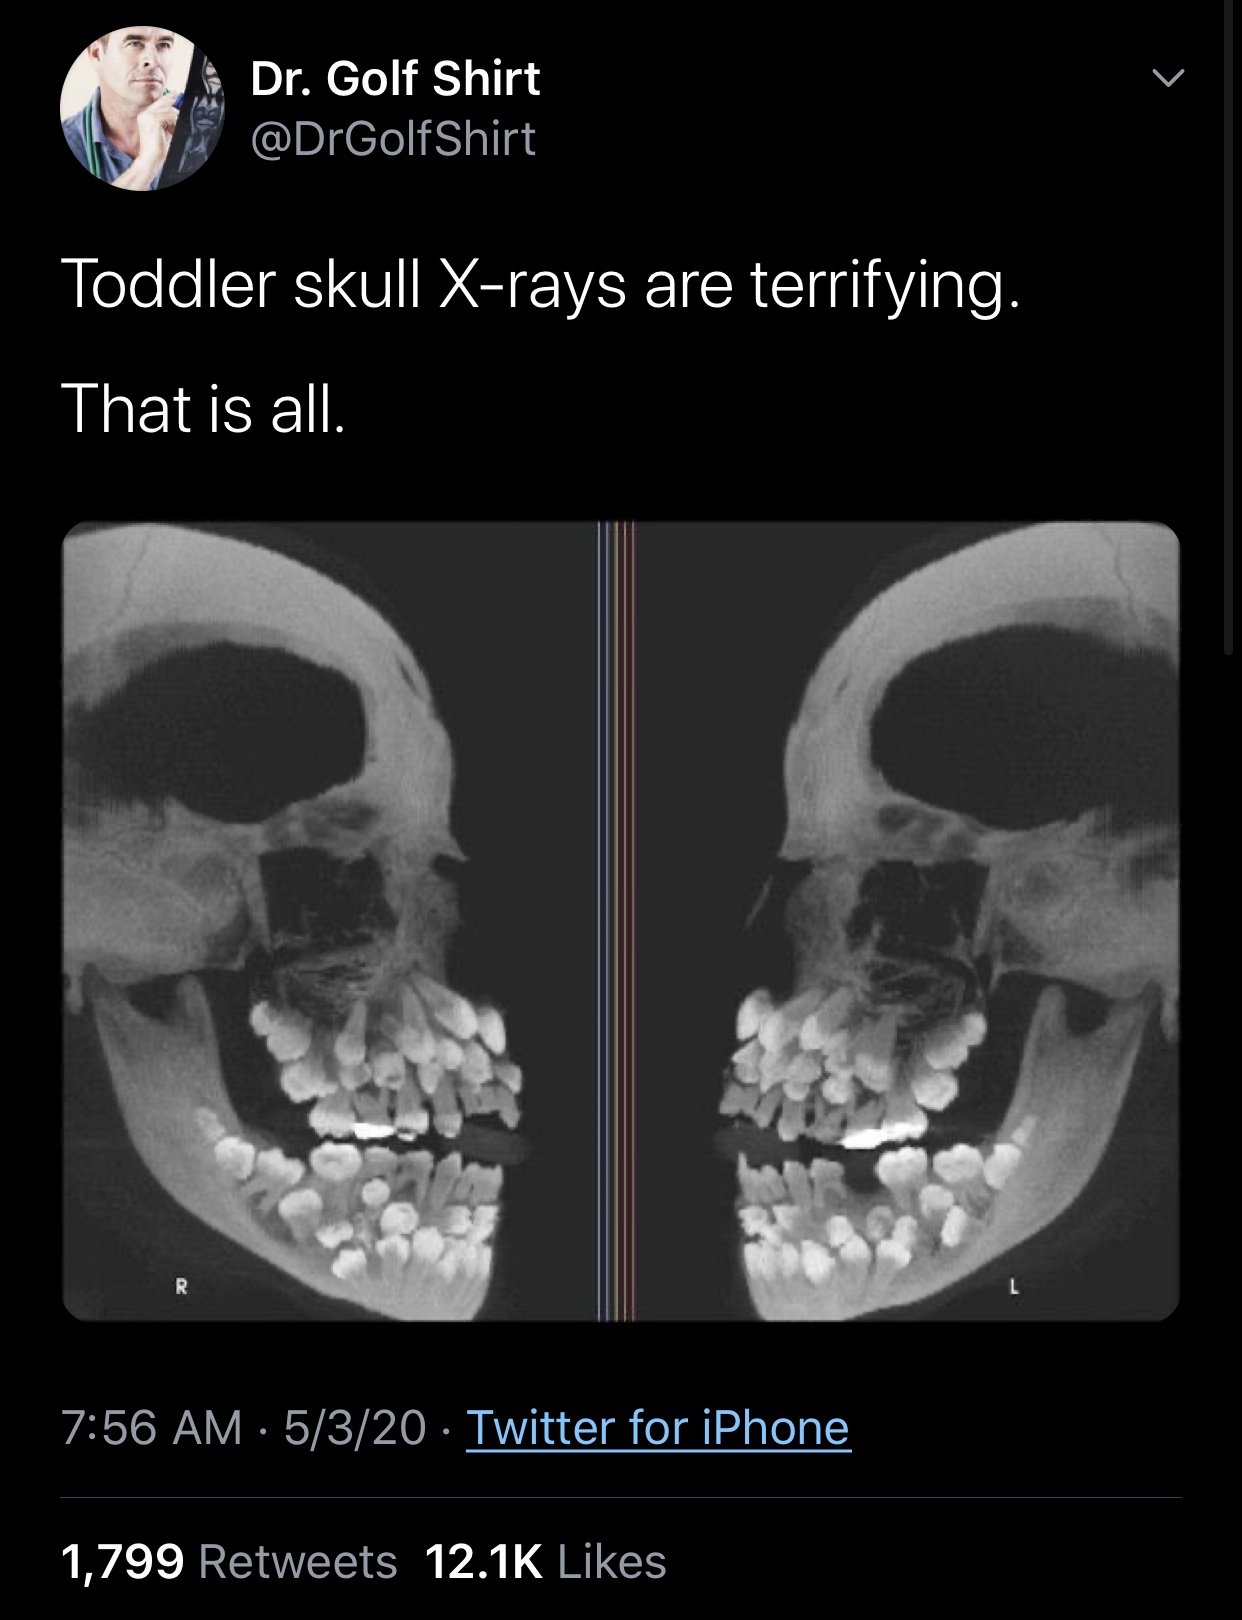 baby skull x ray - Dr. Golf Shirt Toddler skull Xrays are terrifying. That is all. 5320 Twitter for iPhone 1,799